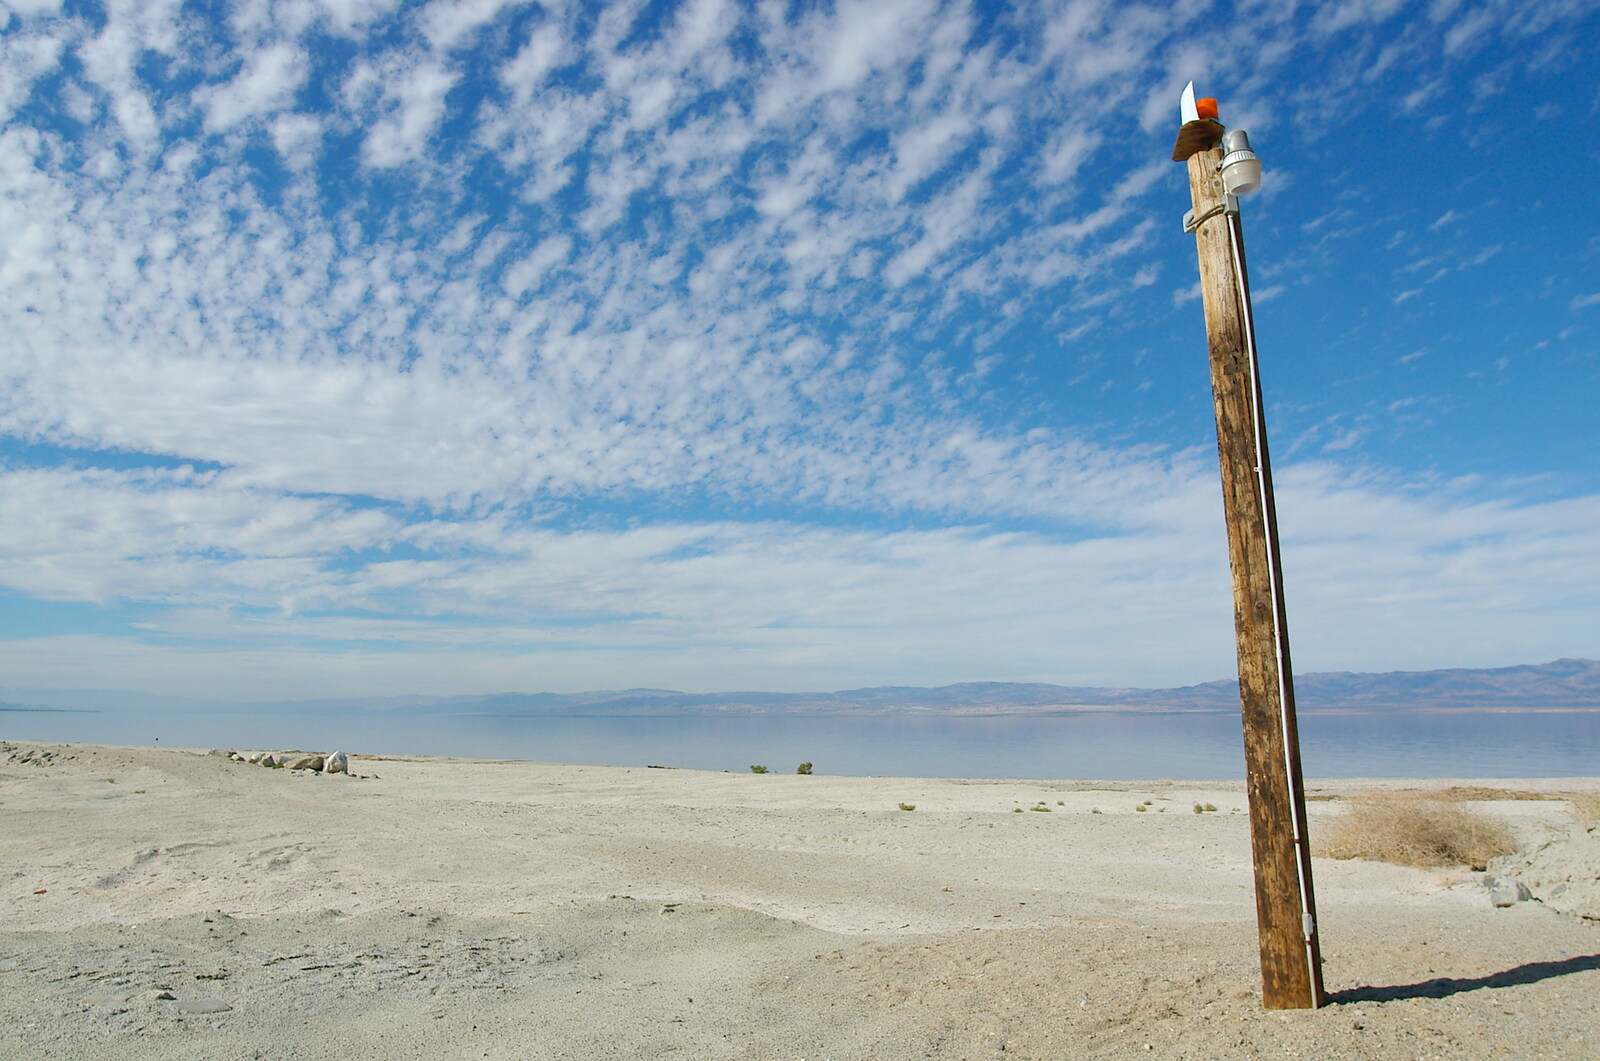 Some sort of navigation aid from California Desert 2: The Salton Sea and Anza-Borrego to Julian, California, US - 24th September 2005